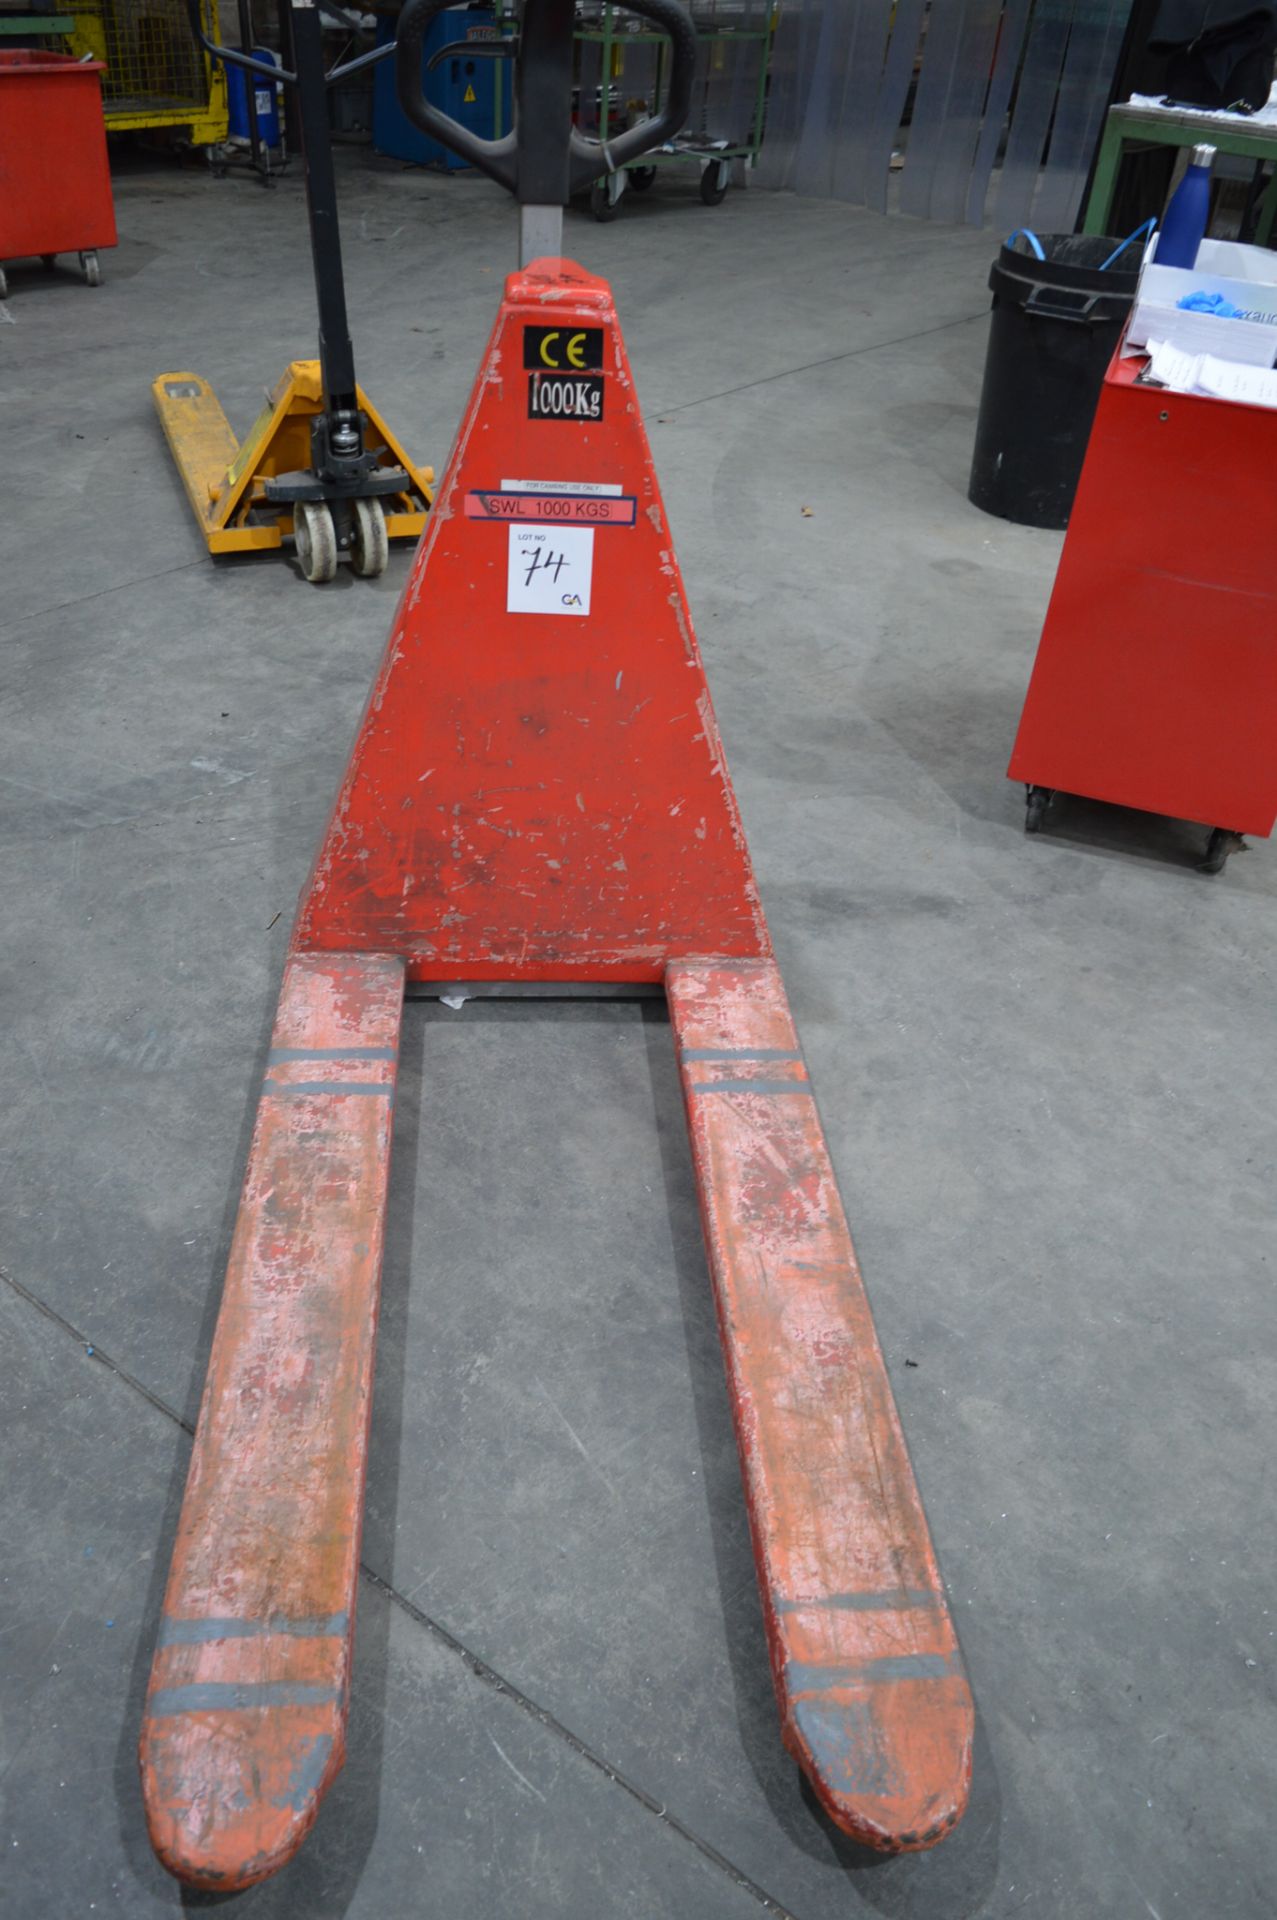 Warrior hydraulic high lift pallet truck Capacity 1000kg - Image 2 of 2